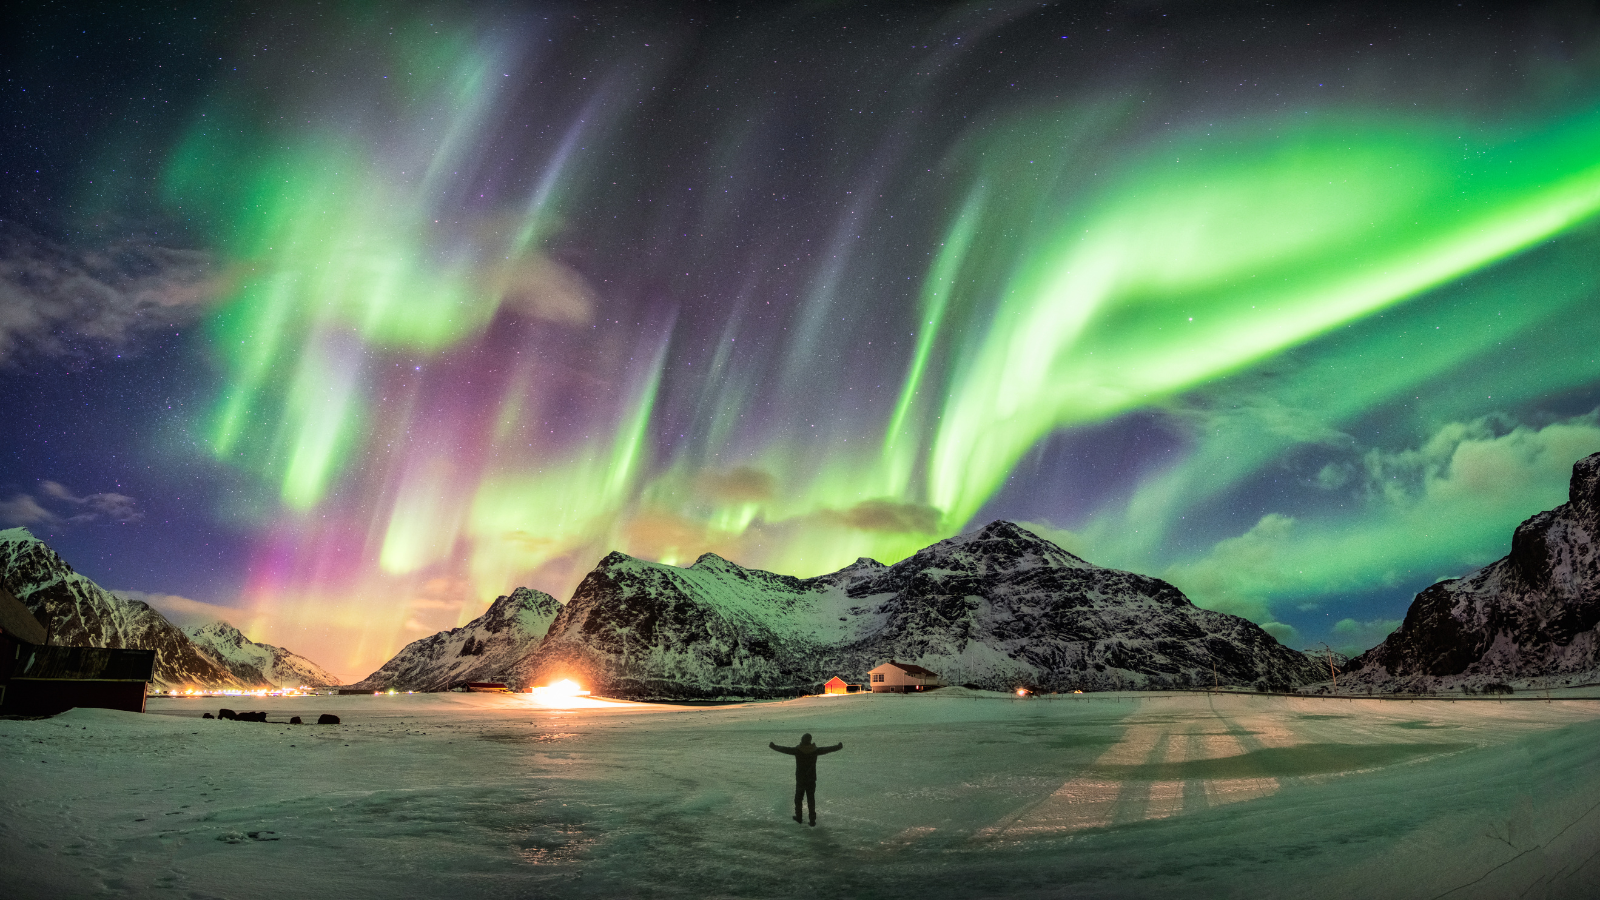 The fifth thing in the list of 10 best things to do in Norway - Experience the Northern Lights